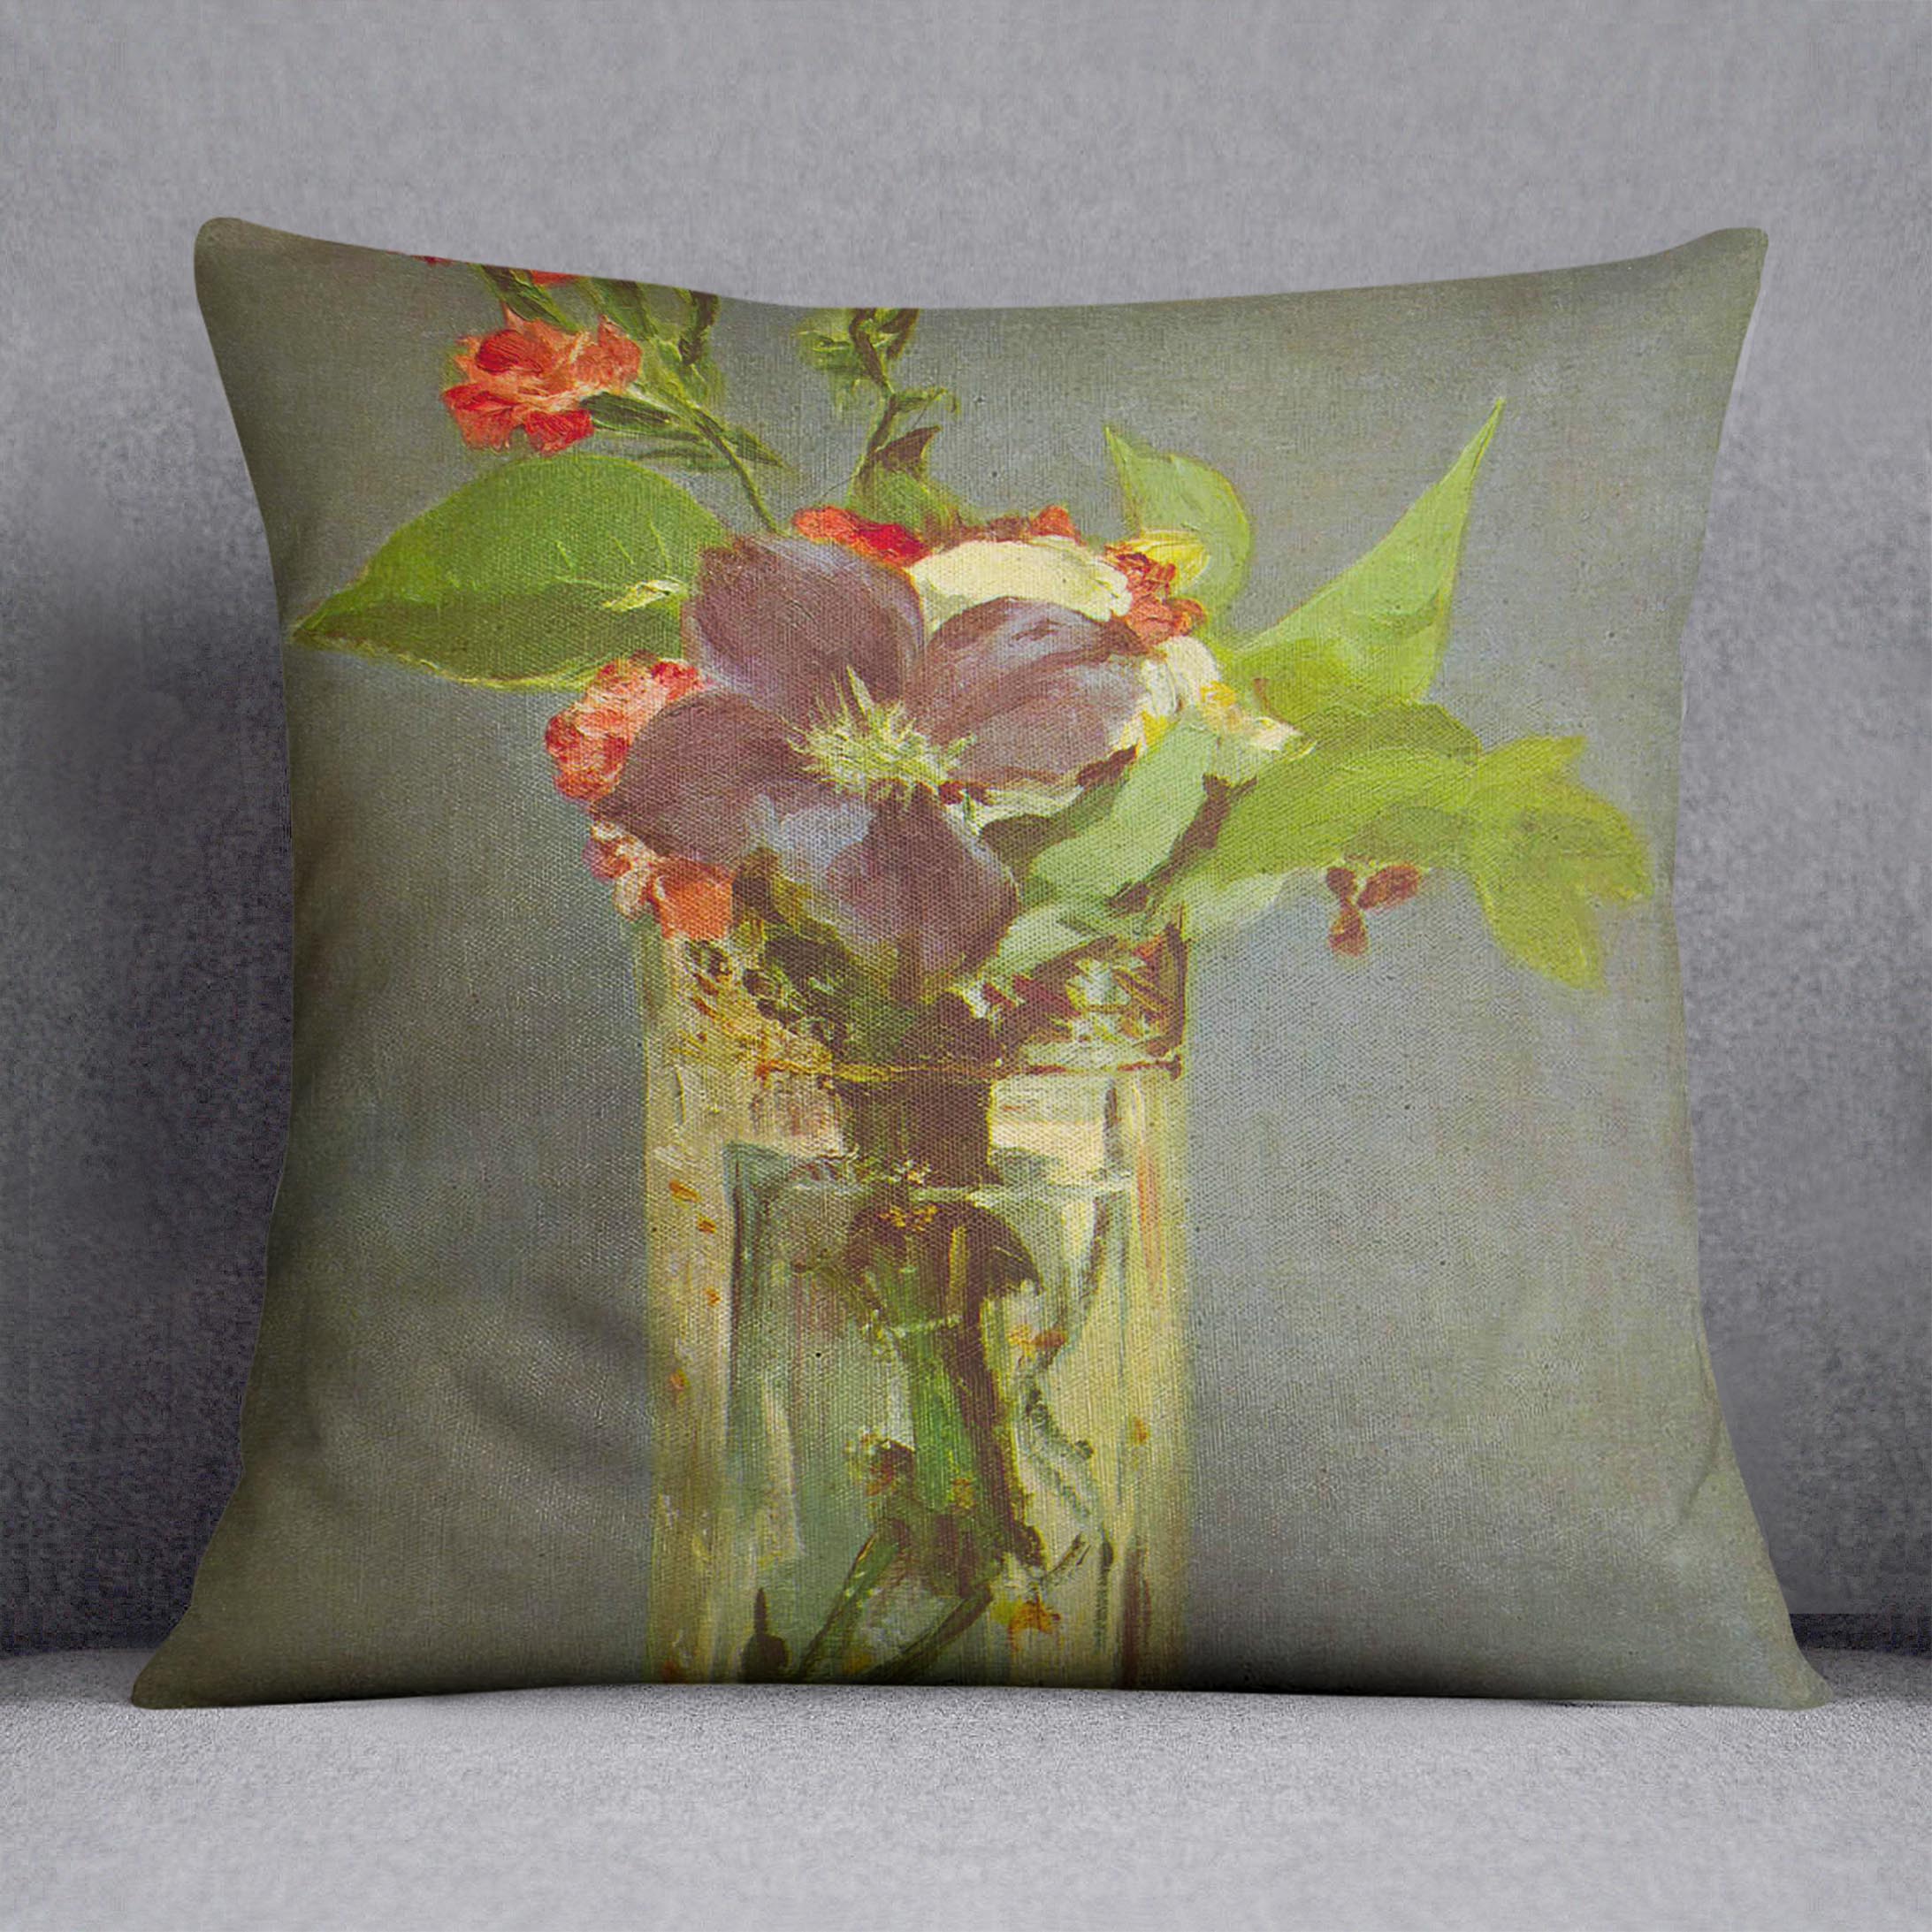 Carnations and Clematis in a Crystal Vase by Manet Cushion